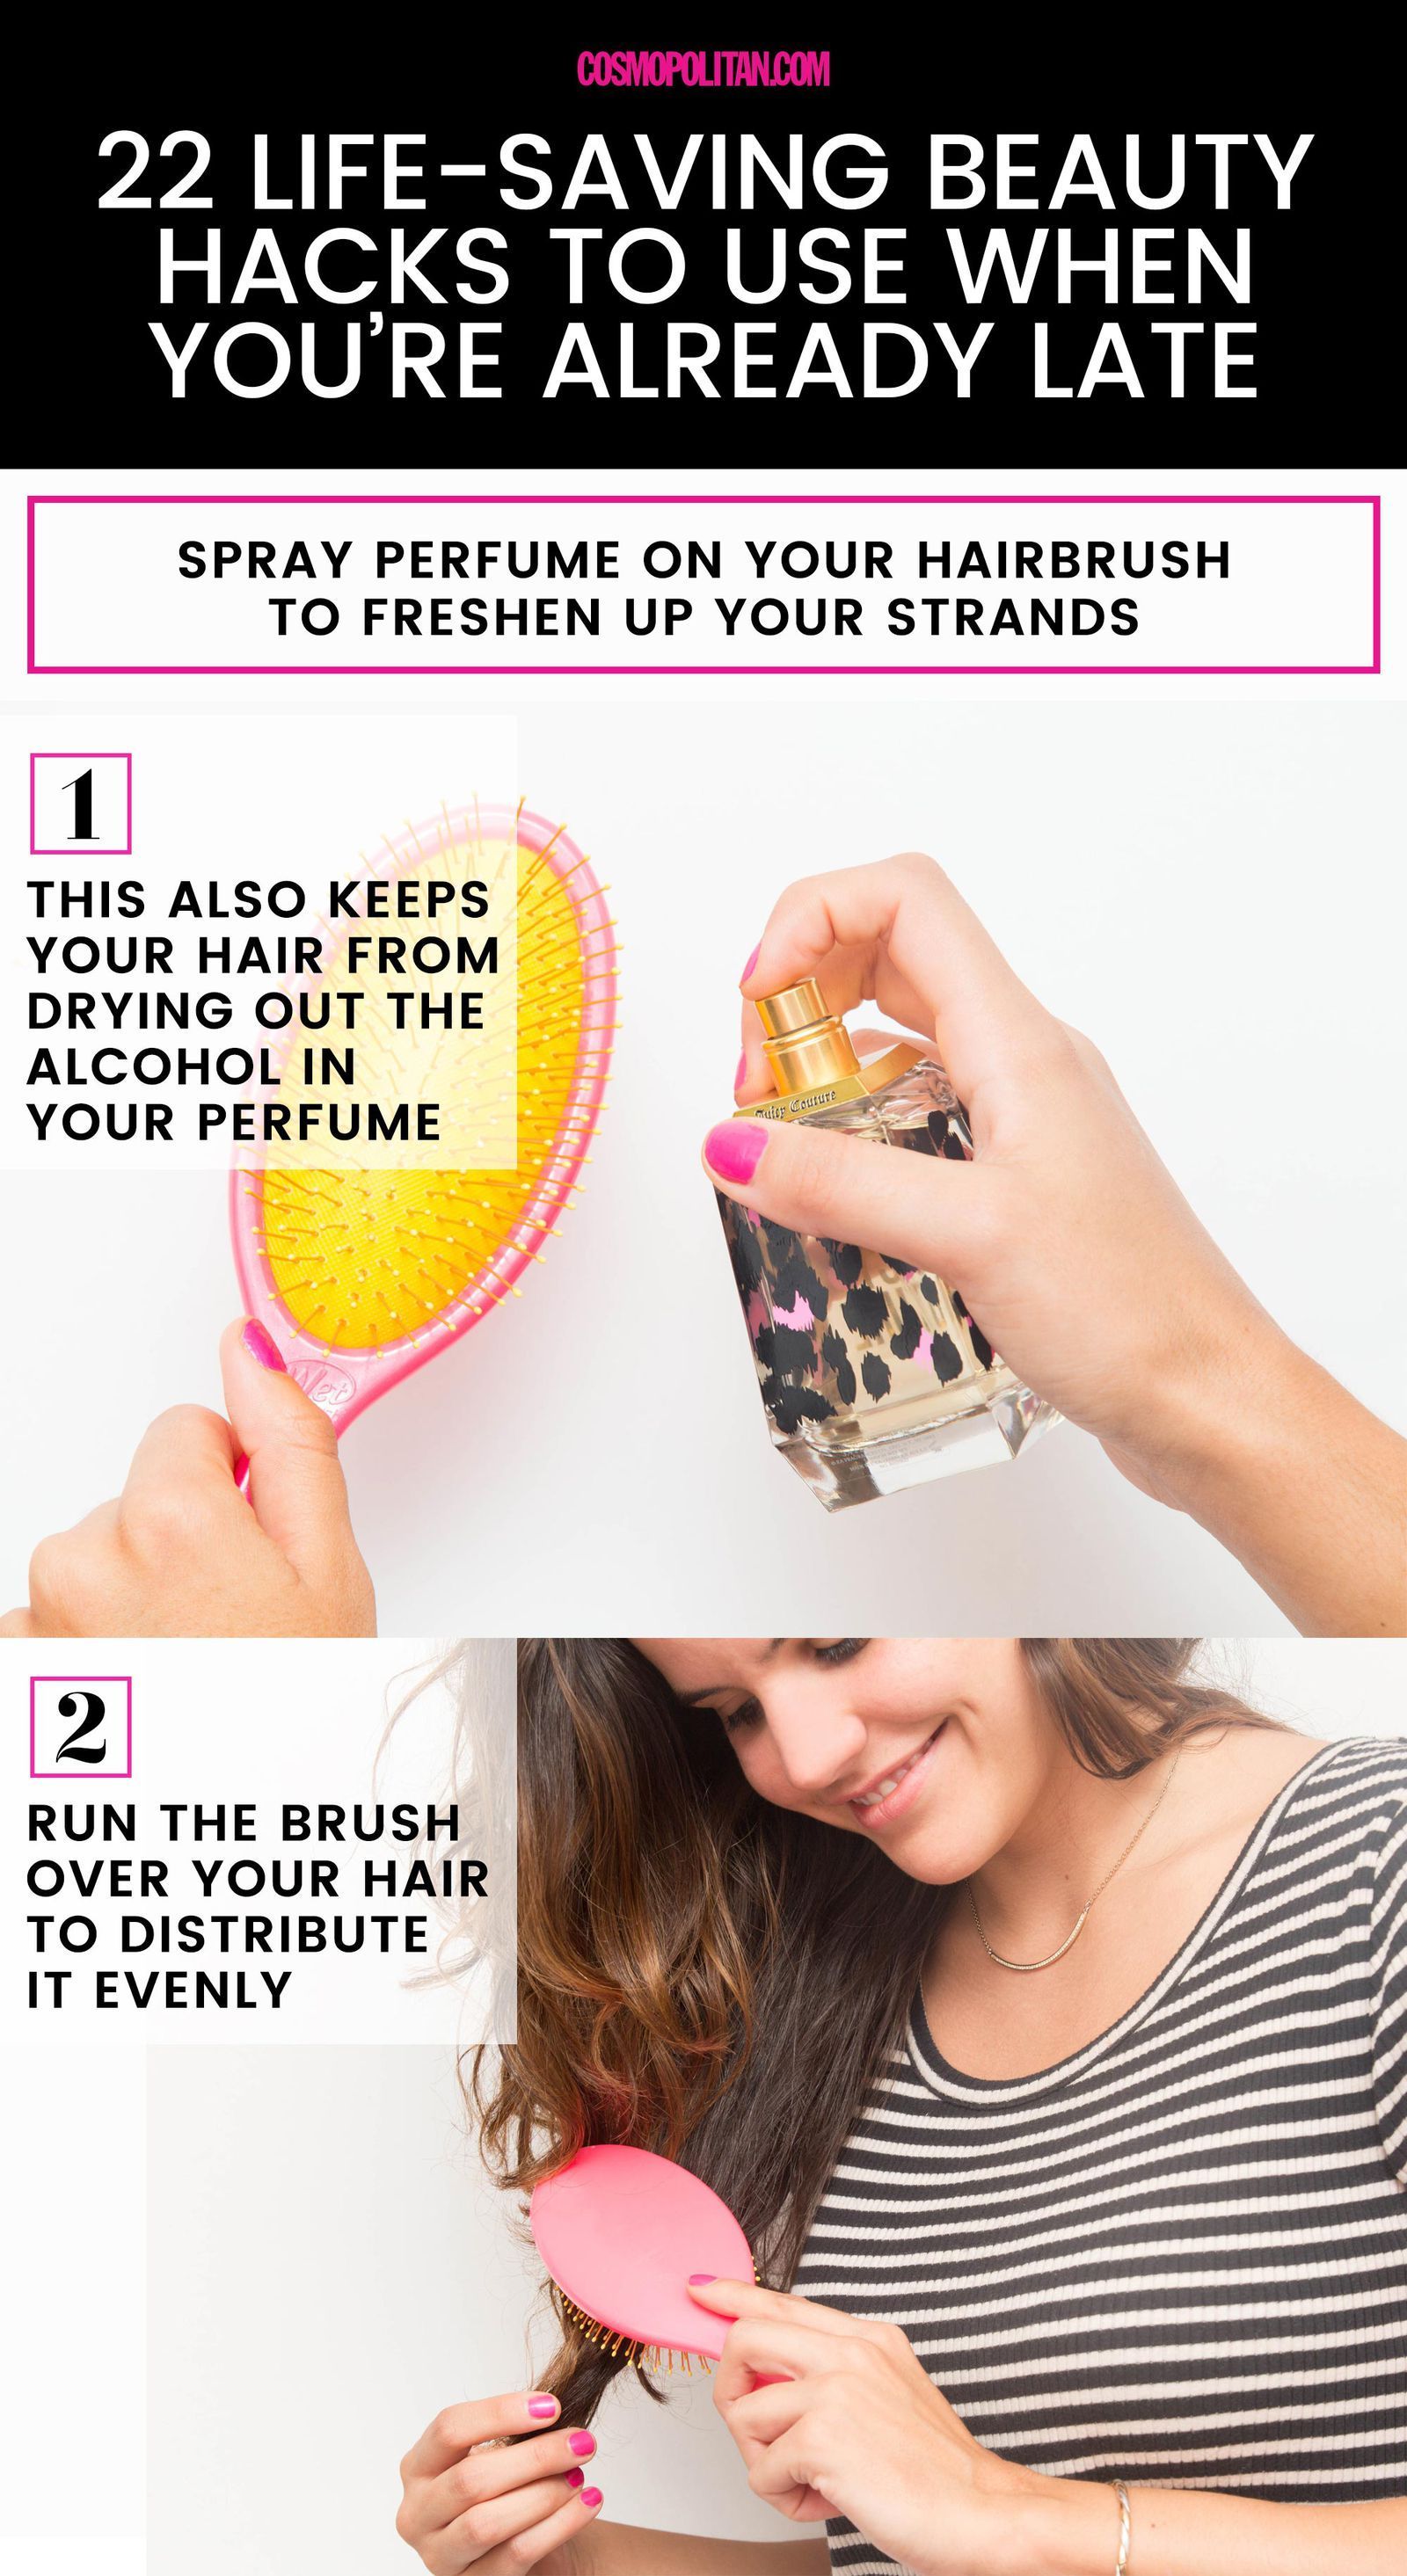 22 Life-Saving Beauty Hacks to Use When You're Already Late - 22 Life-Saving Beauty Hacks to Use When You're Already Late -   13 beauty Hacks lifehacks ideas